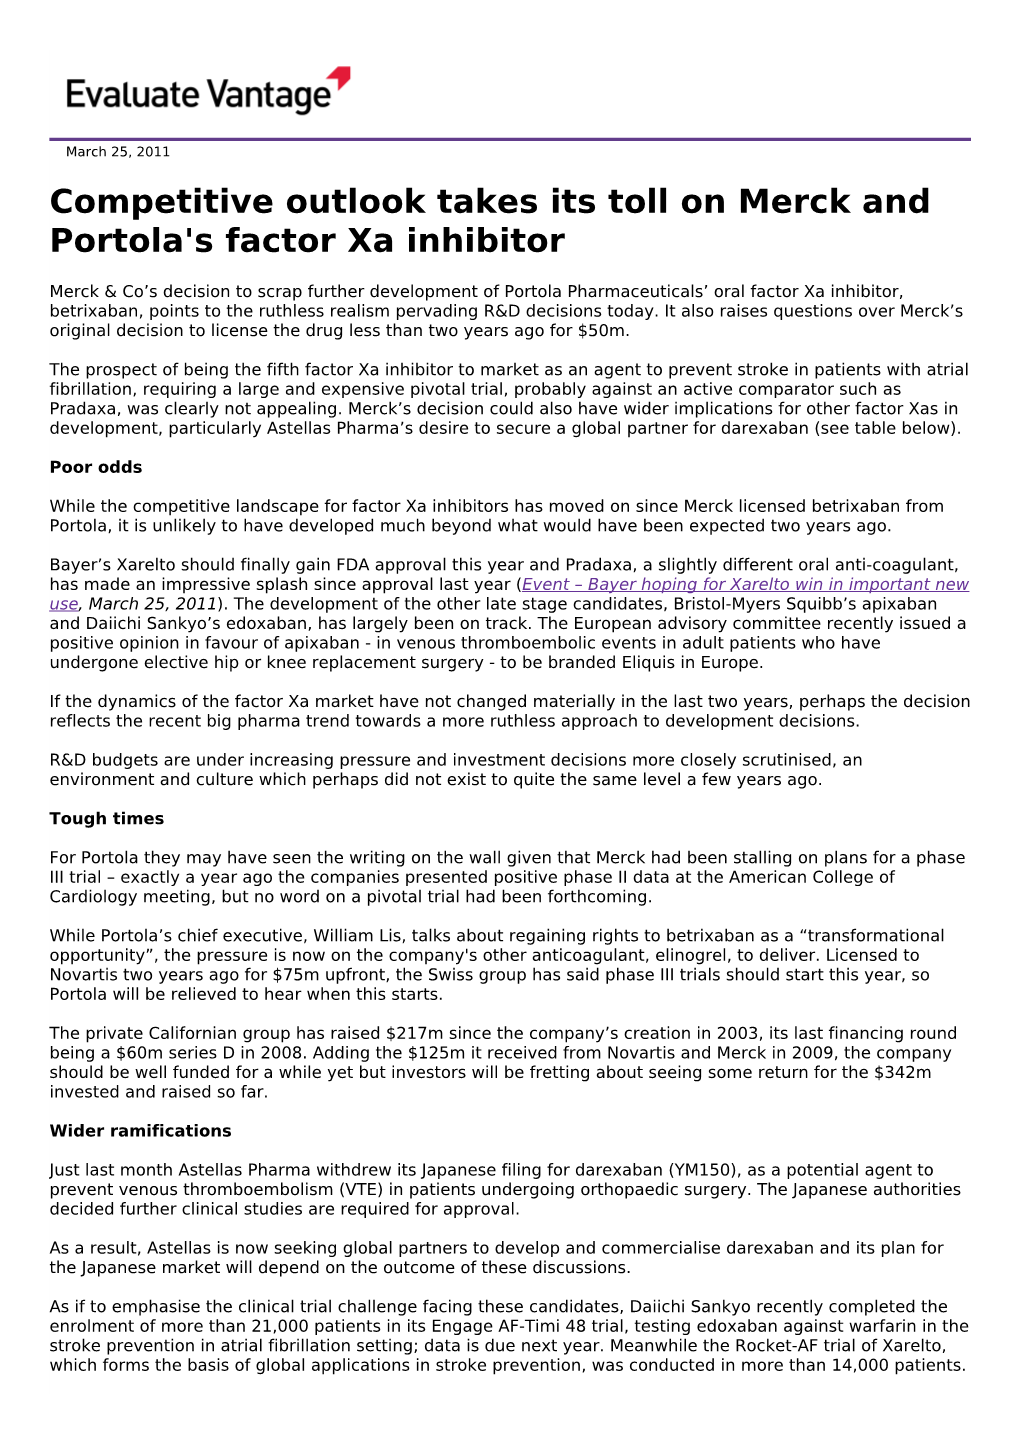 Competitive Outlook Takes Its Toll on Merck and Portola's Factor Xa Inhibitor